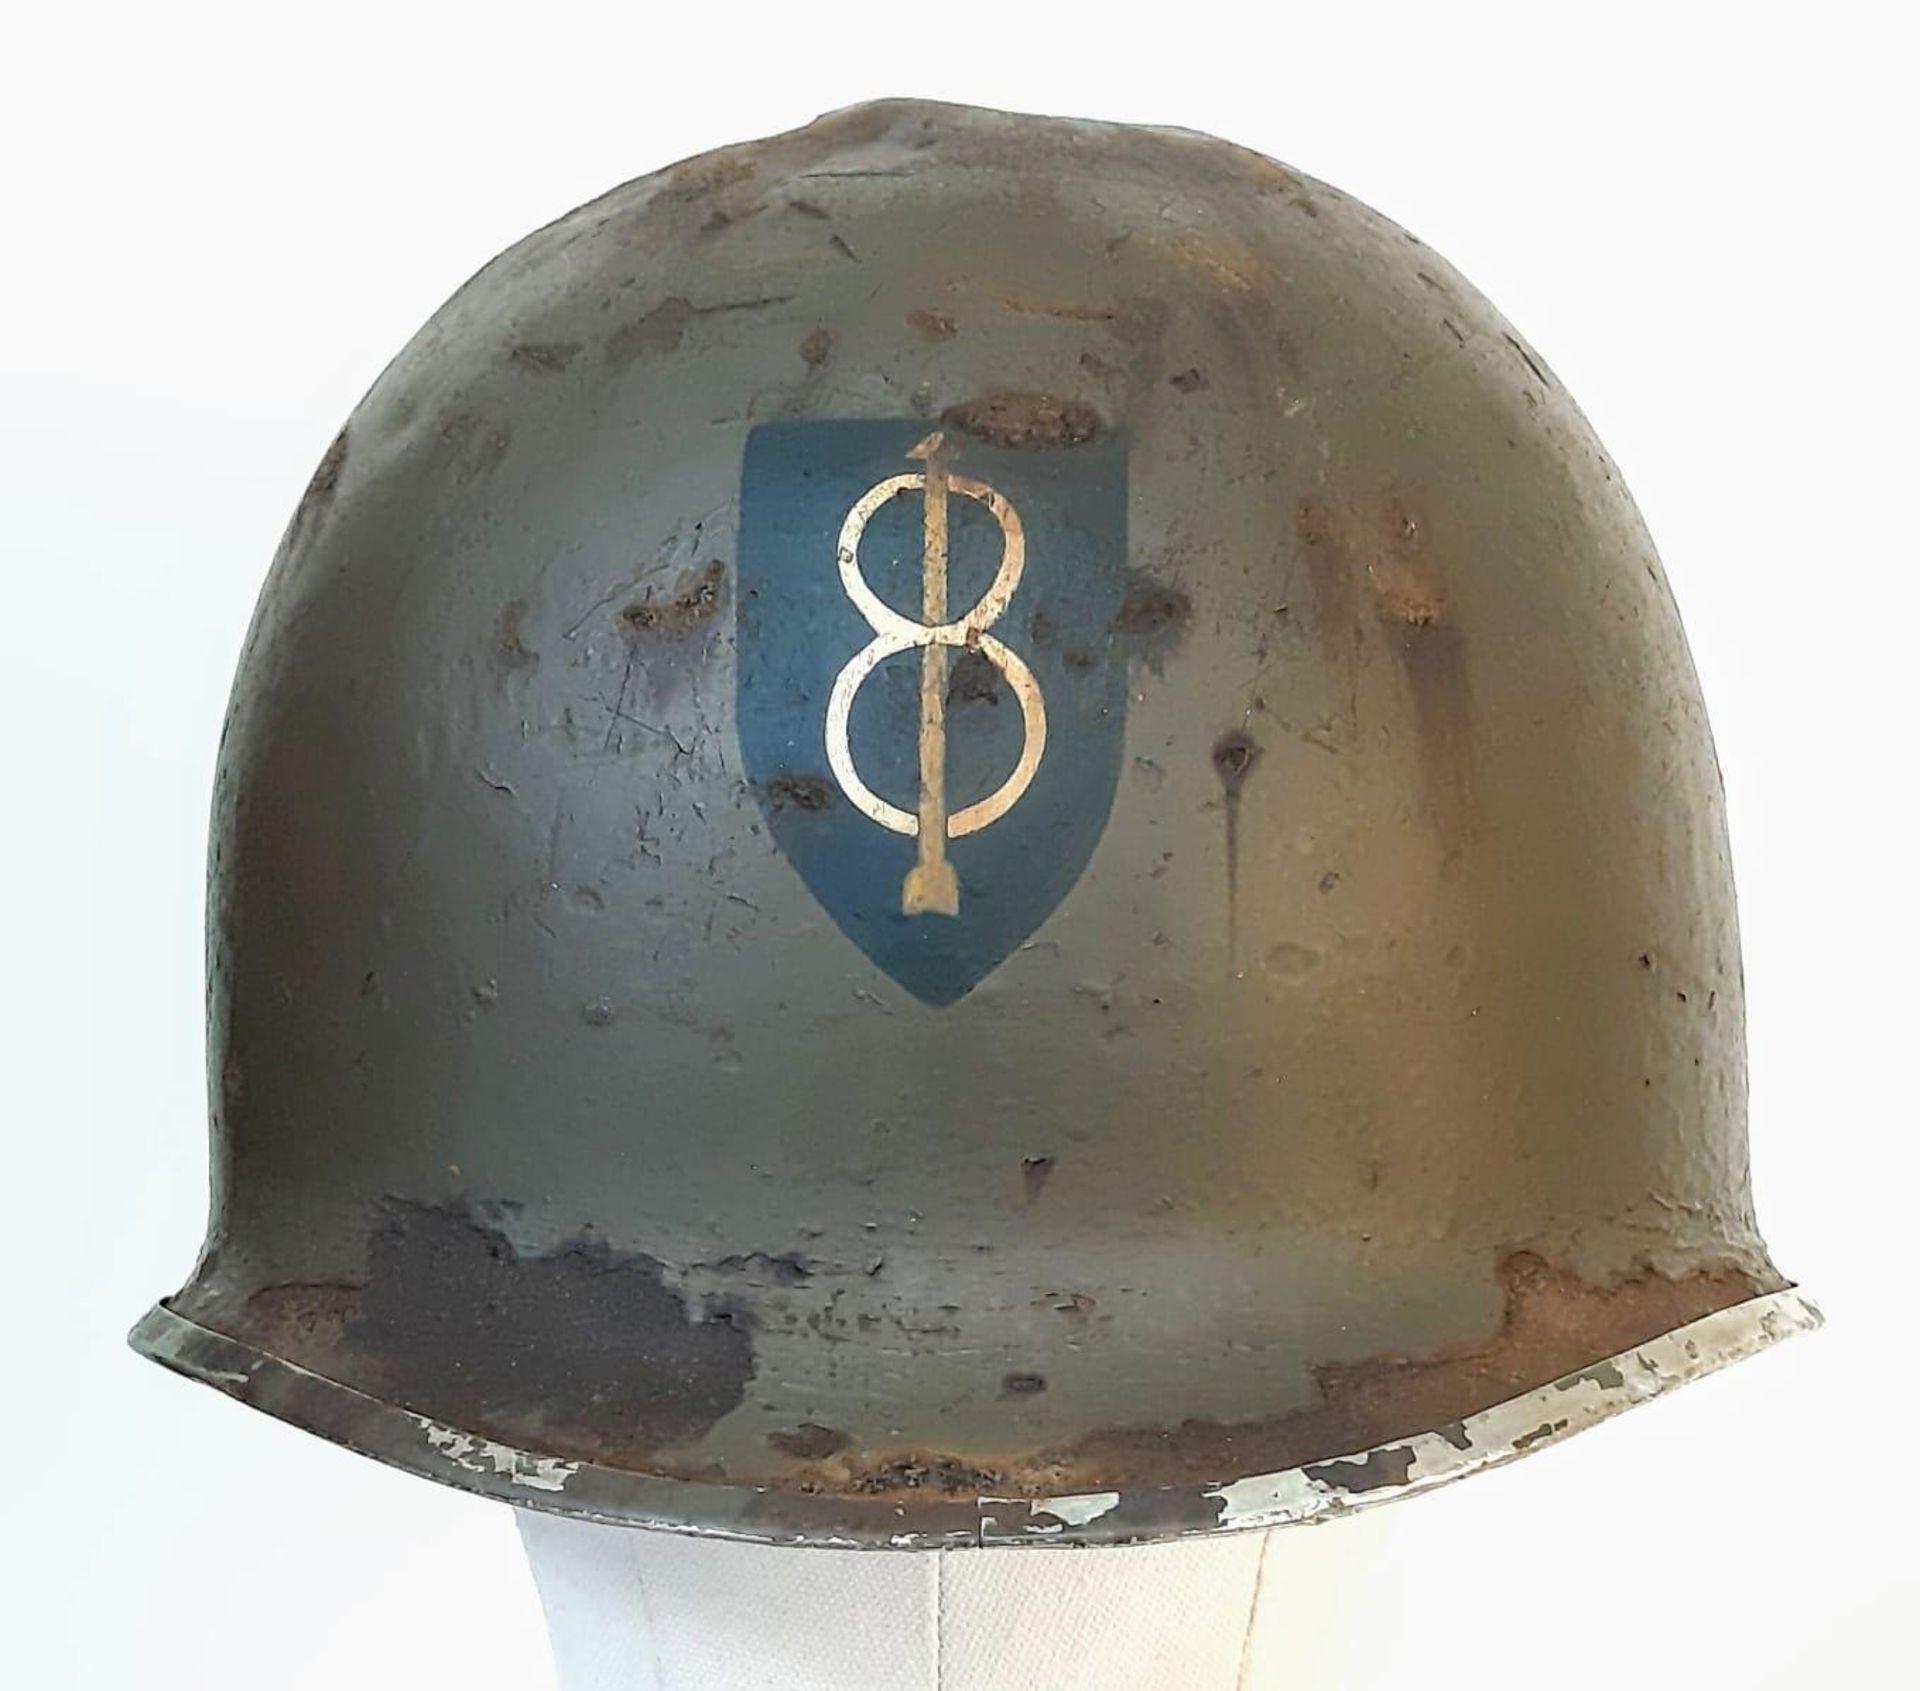 WW2 US M1 Swivel Bale Helmet, with insignia of the 8 th Infantry Division. This helmet has the